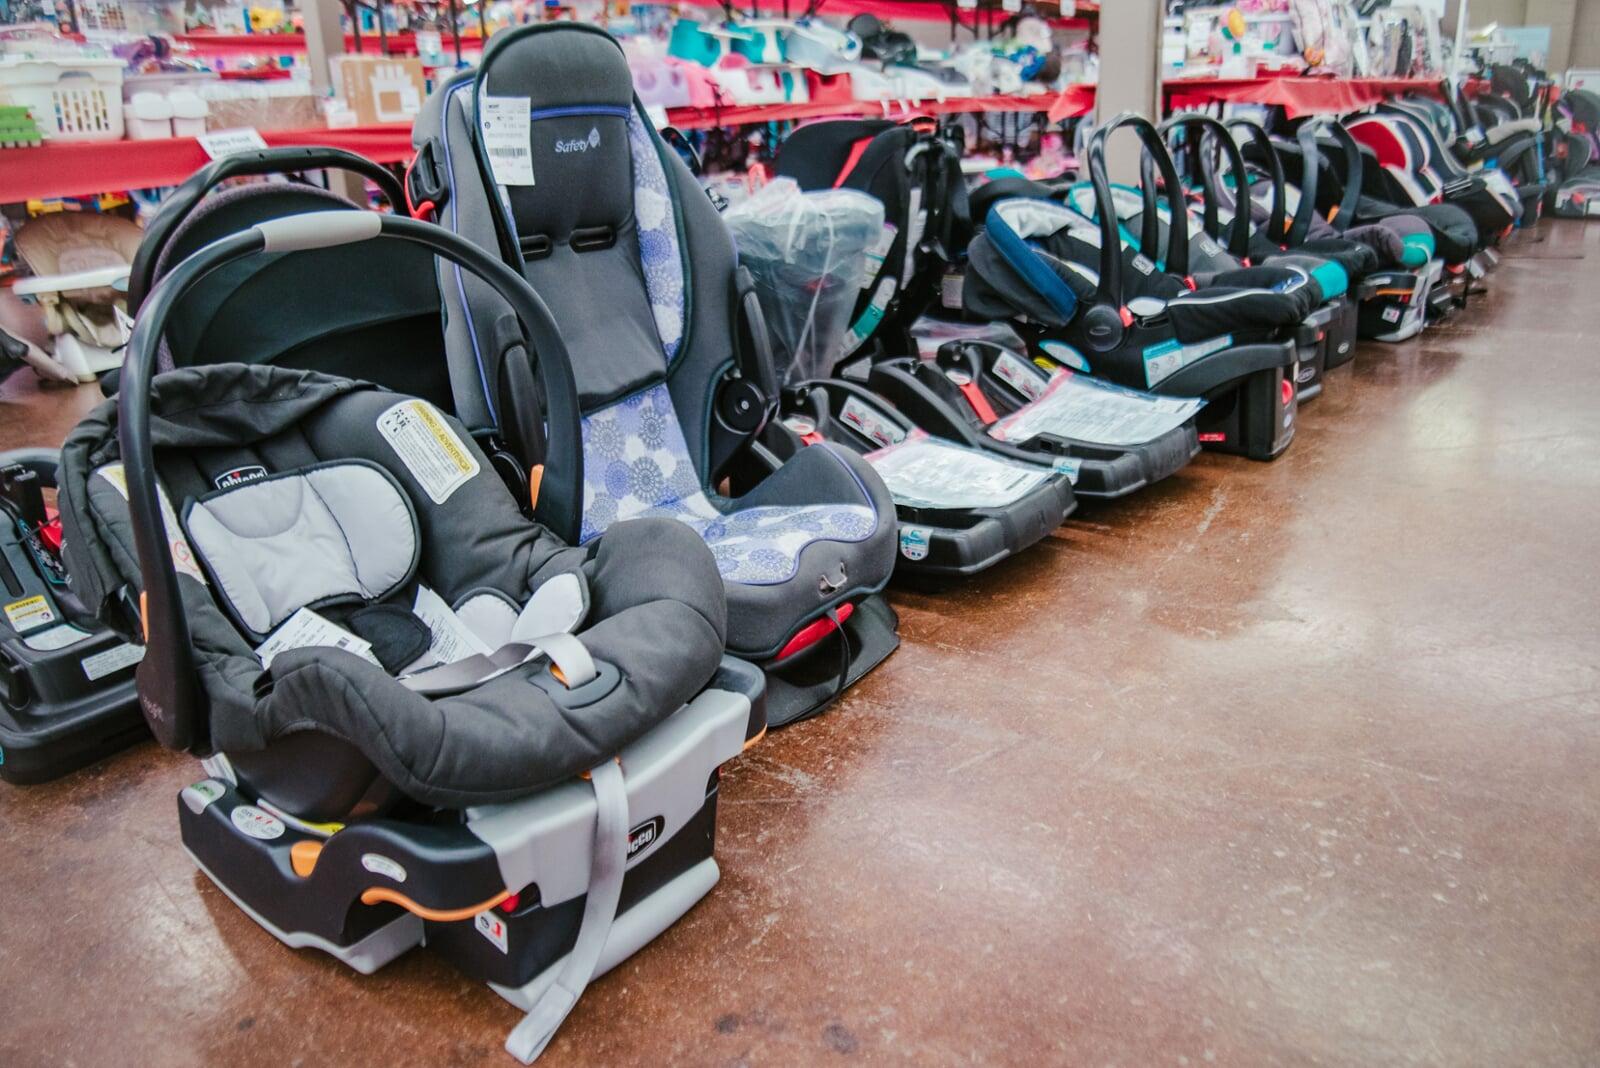 Variety of carseats displayed on the floor